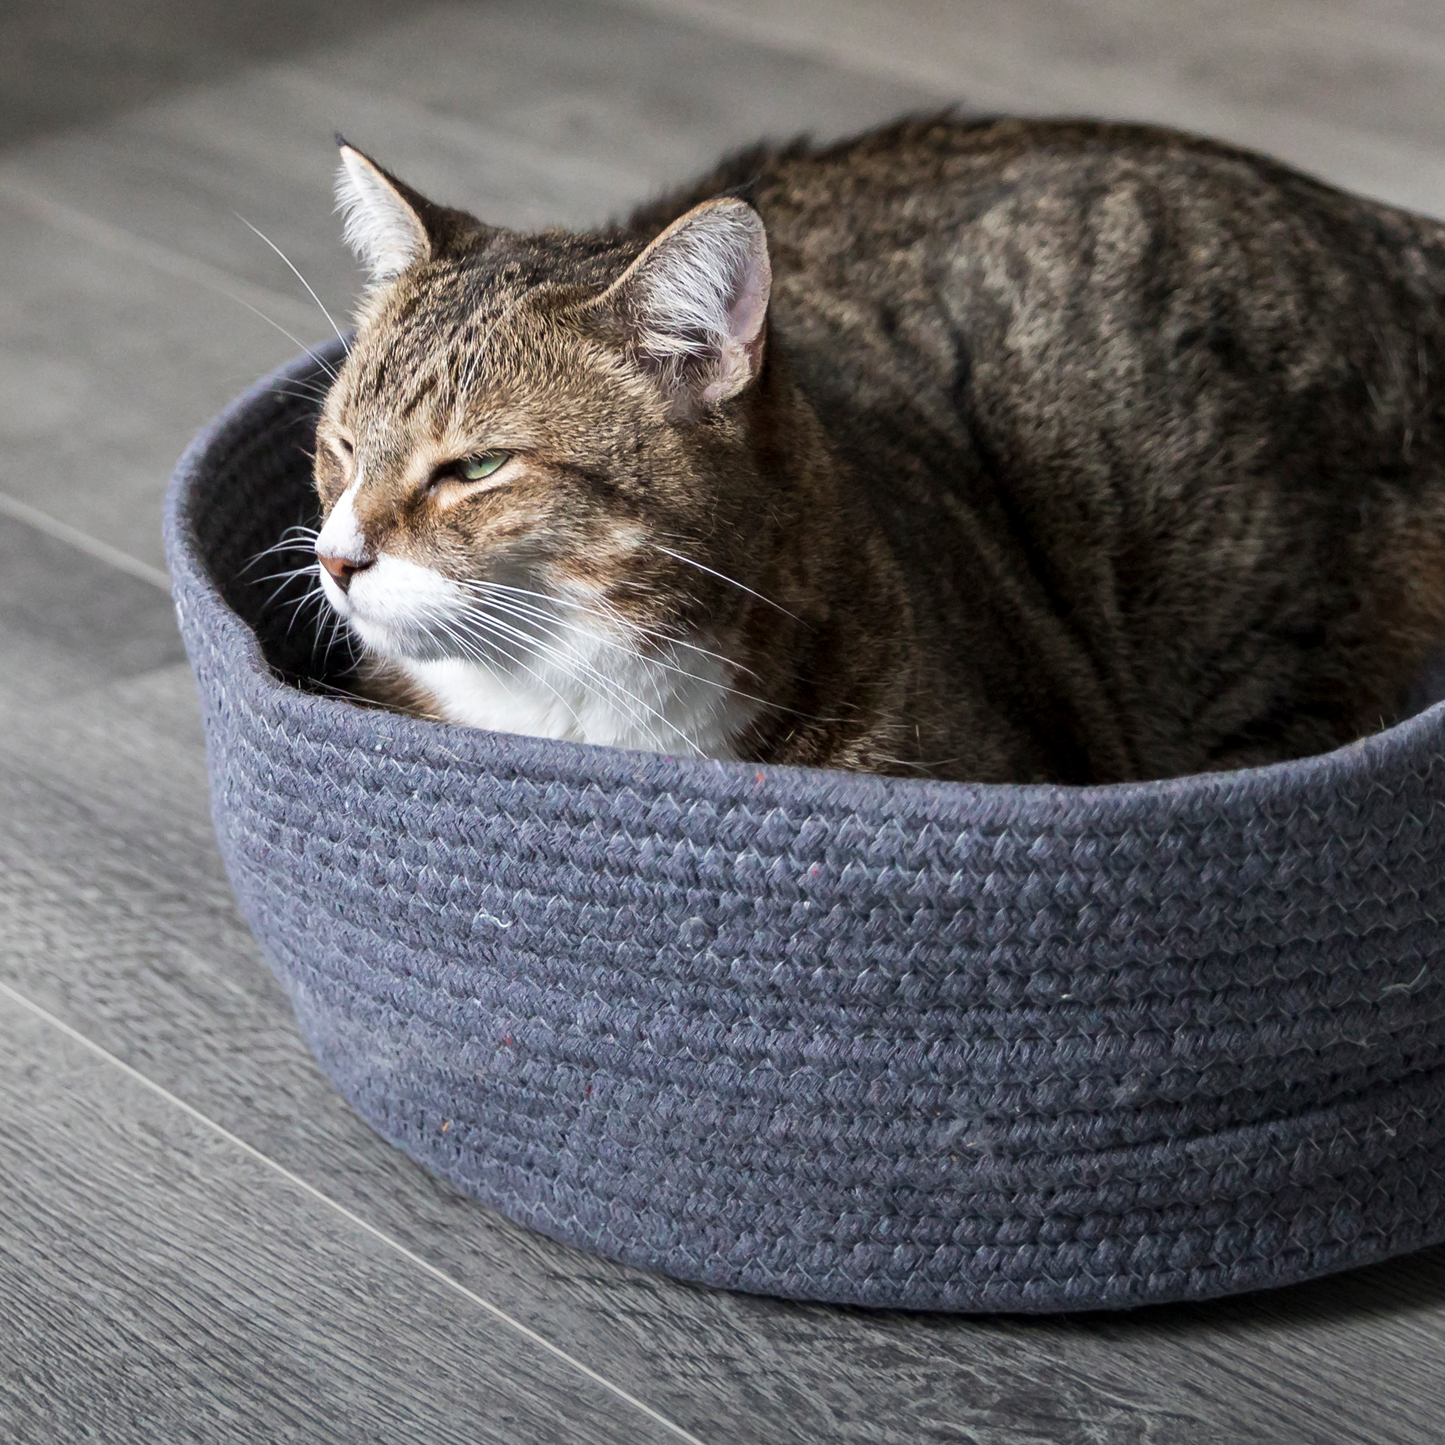 Woven basket bed for cat, gray